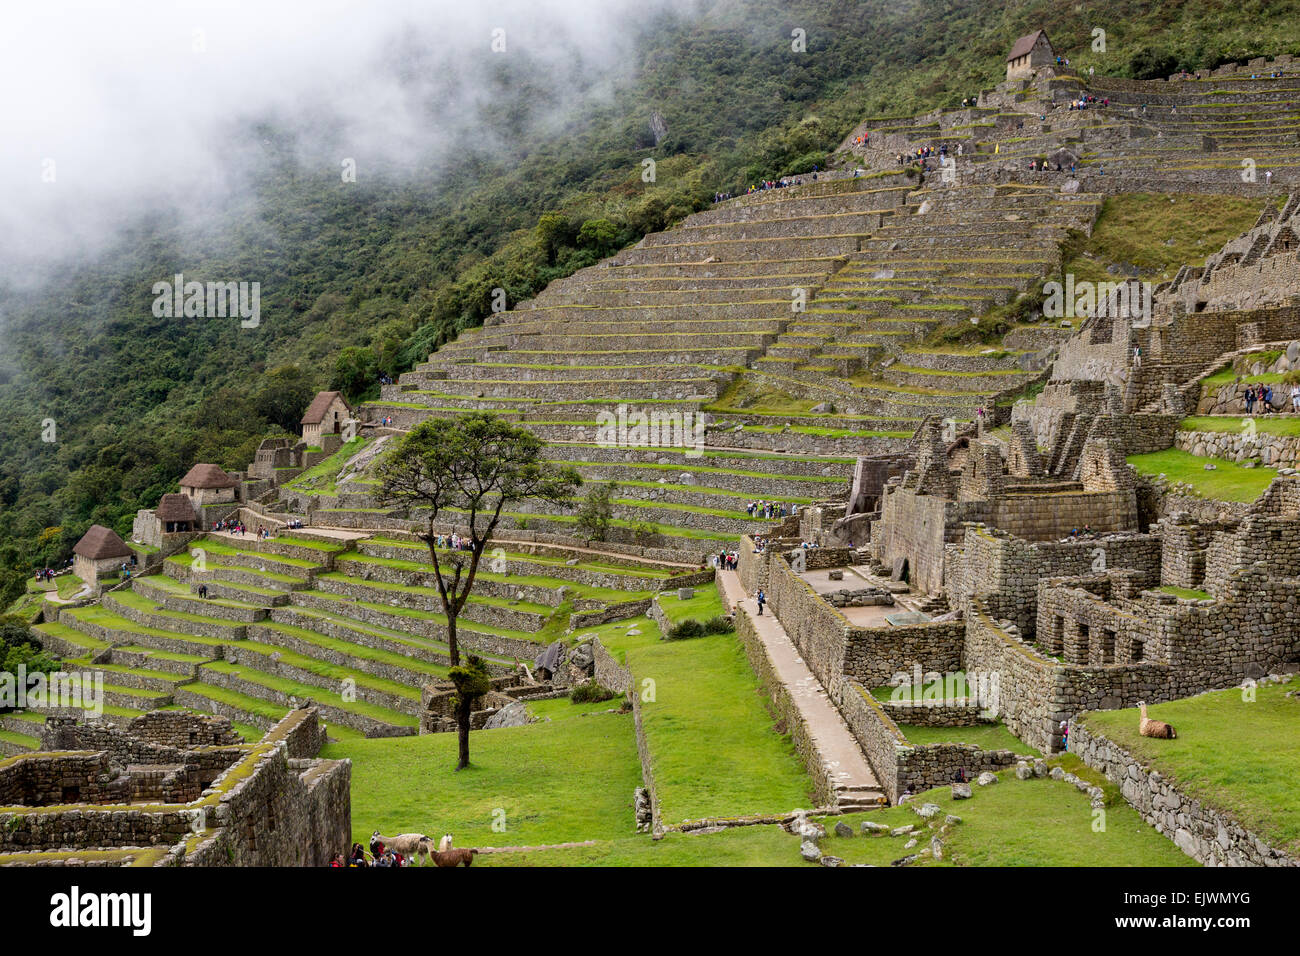 Peru, Machu Picchu.  Agricultural Terraces below the Guardhouse (Upper Right); Royal Residence, lower right. Stock Photo